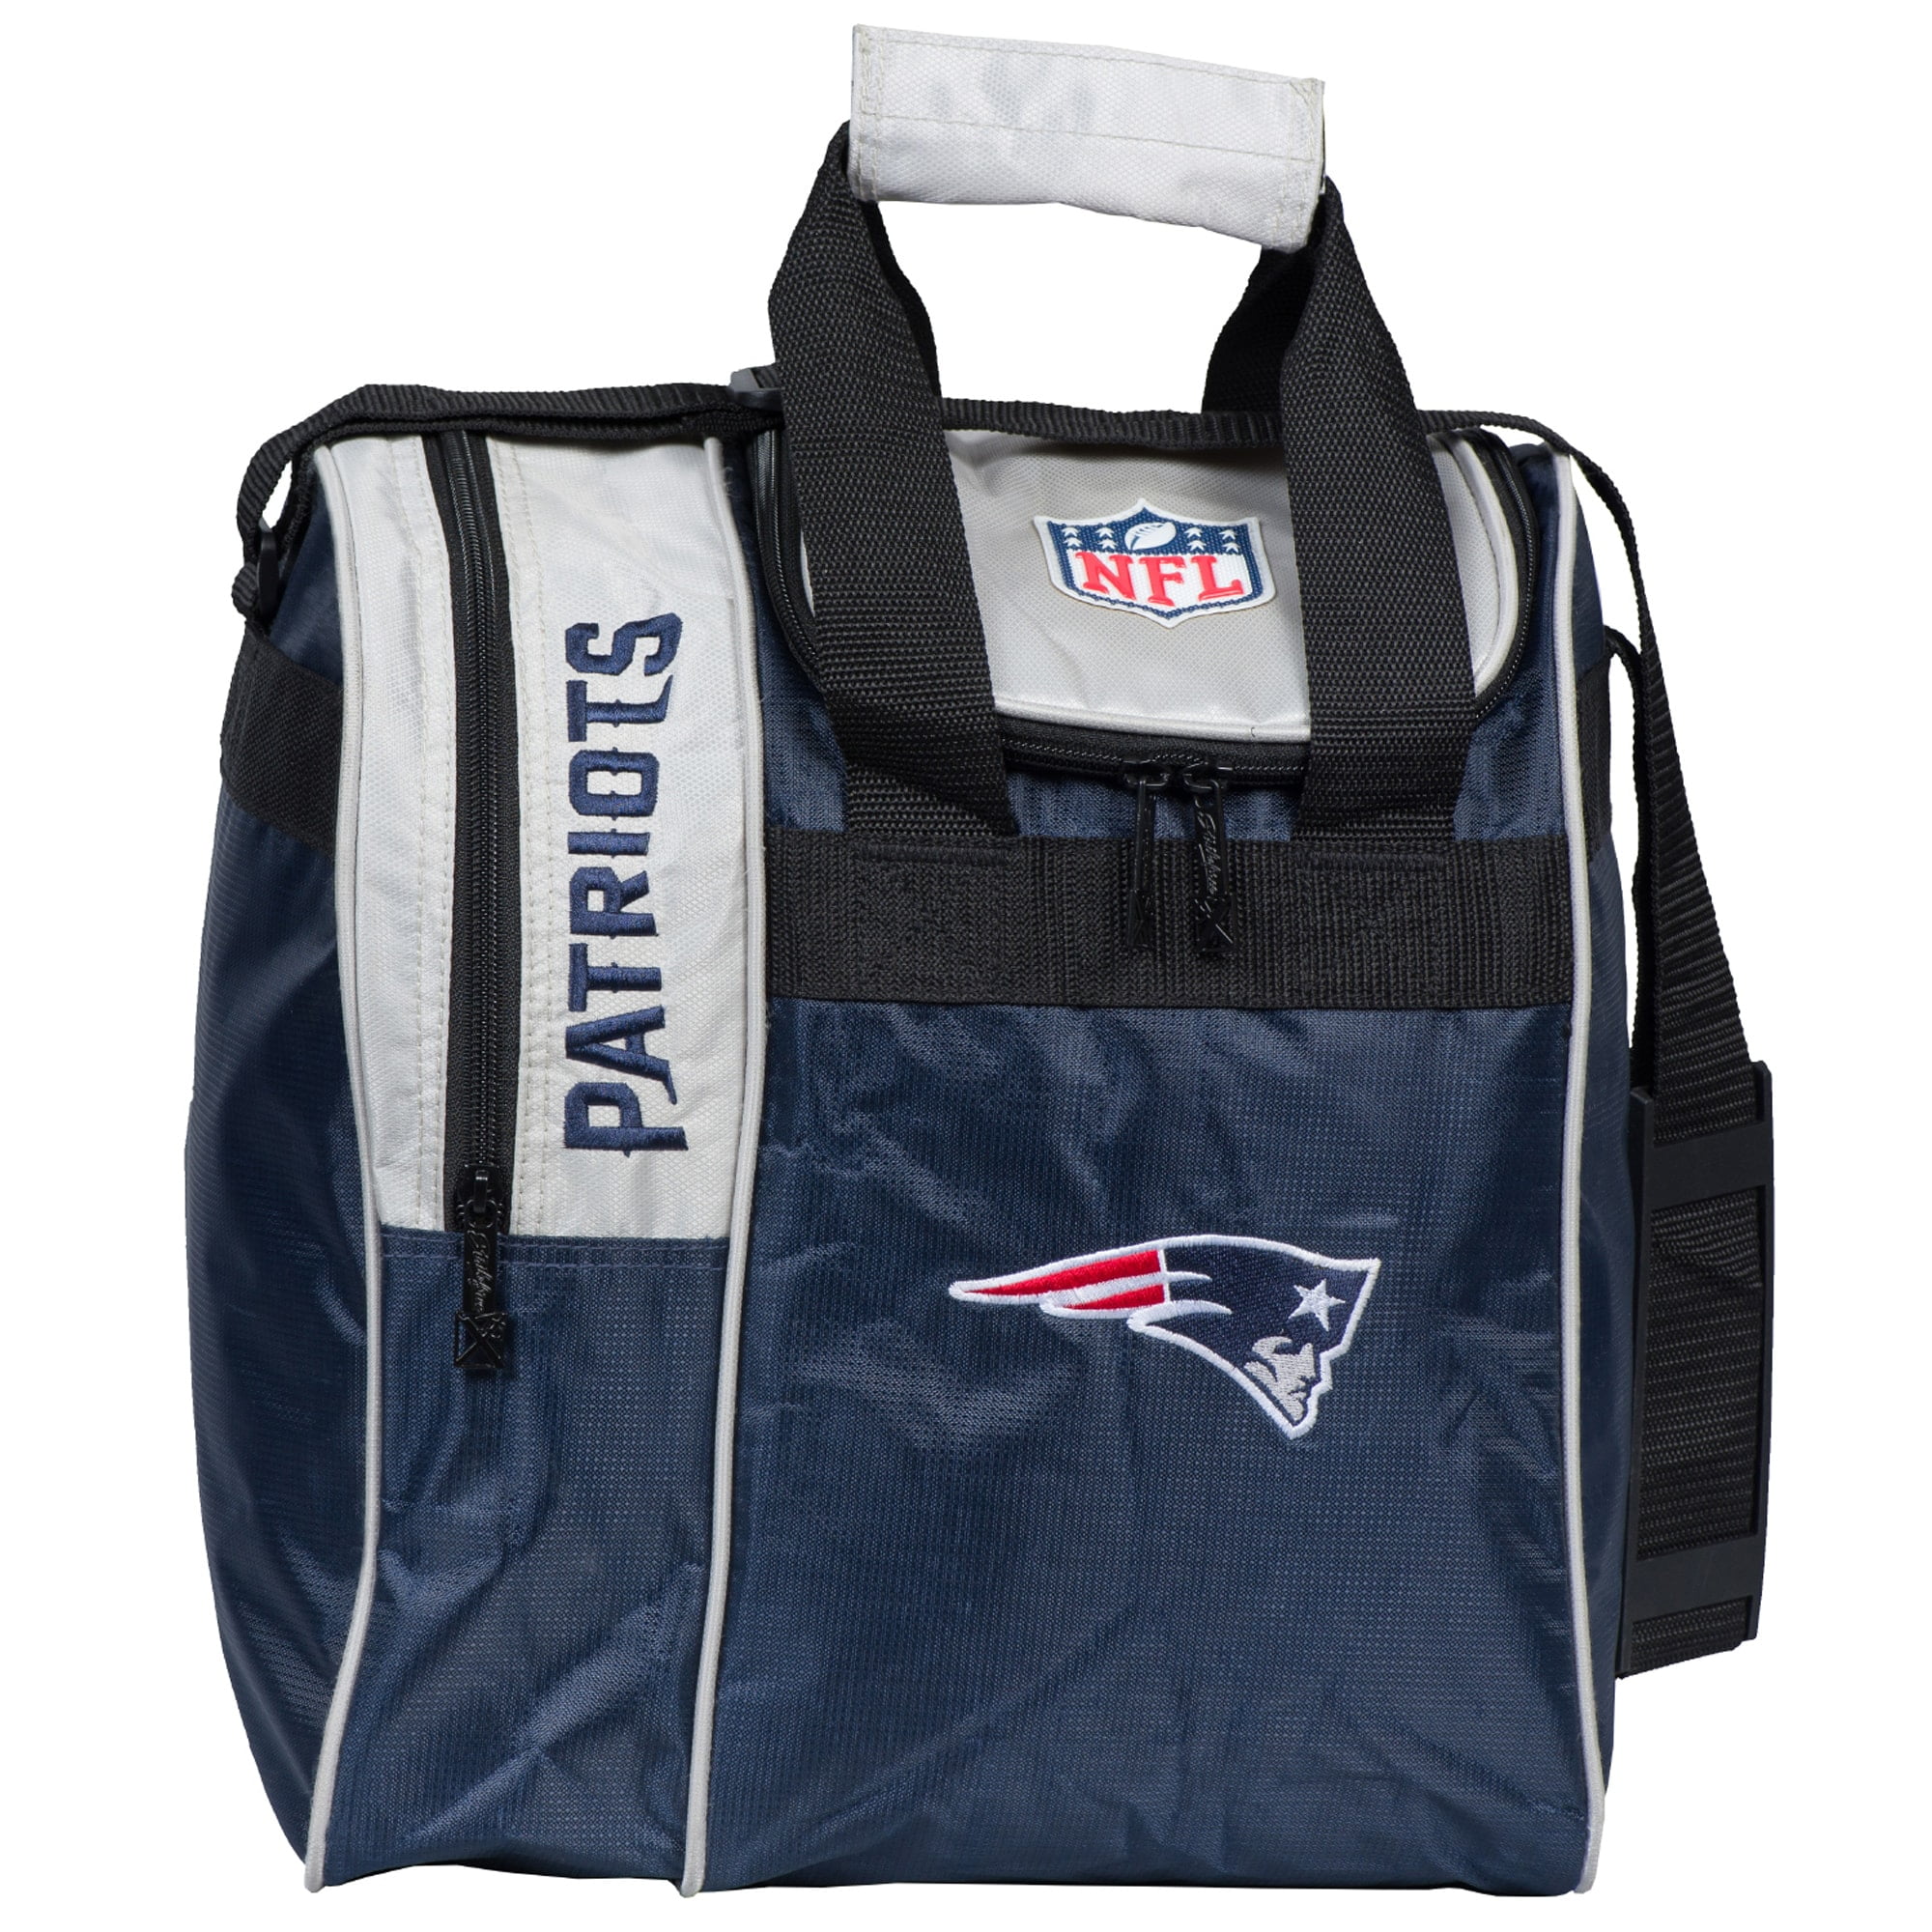 New England Patriots Single Bowling Ball Tote Bag with Shoe Compartment -  Walmart.com